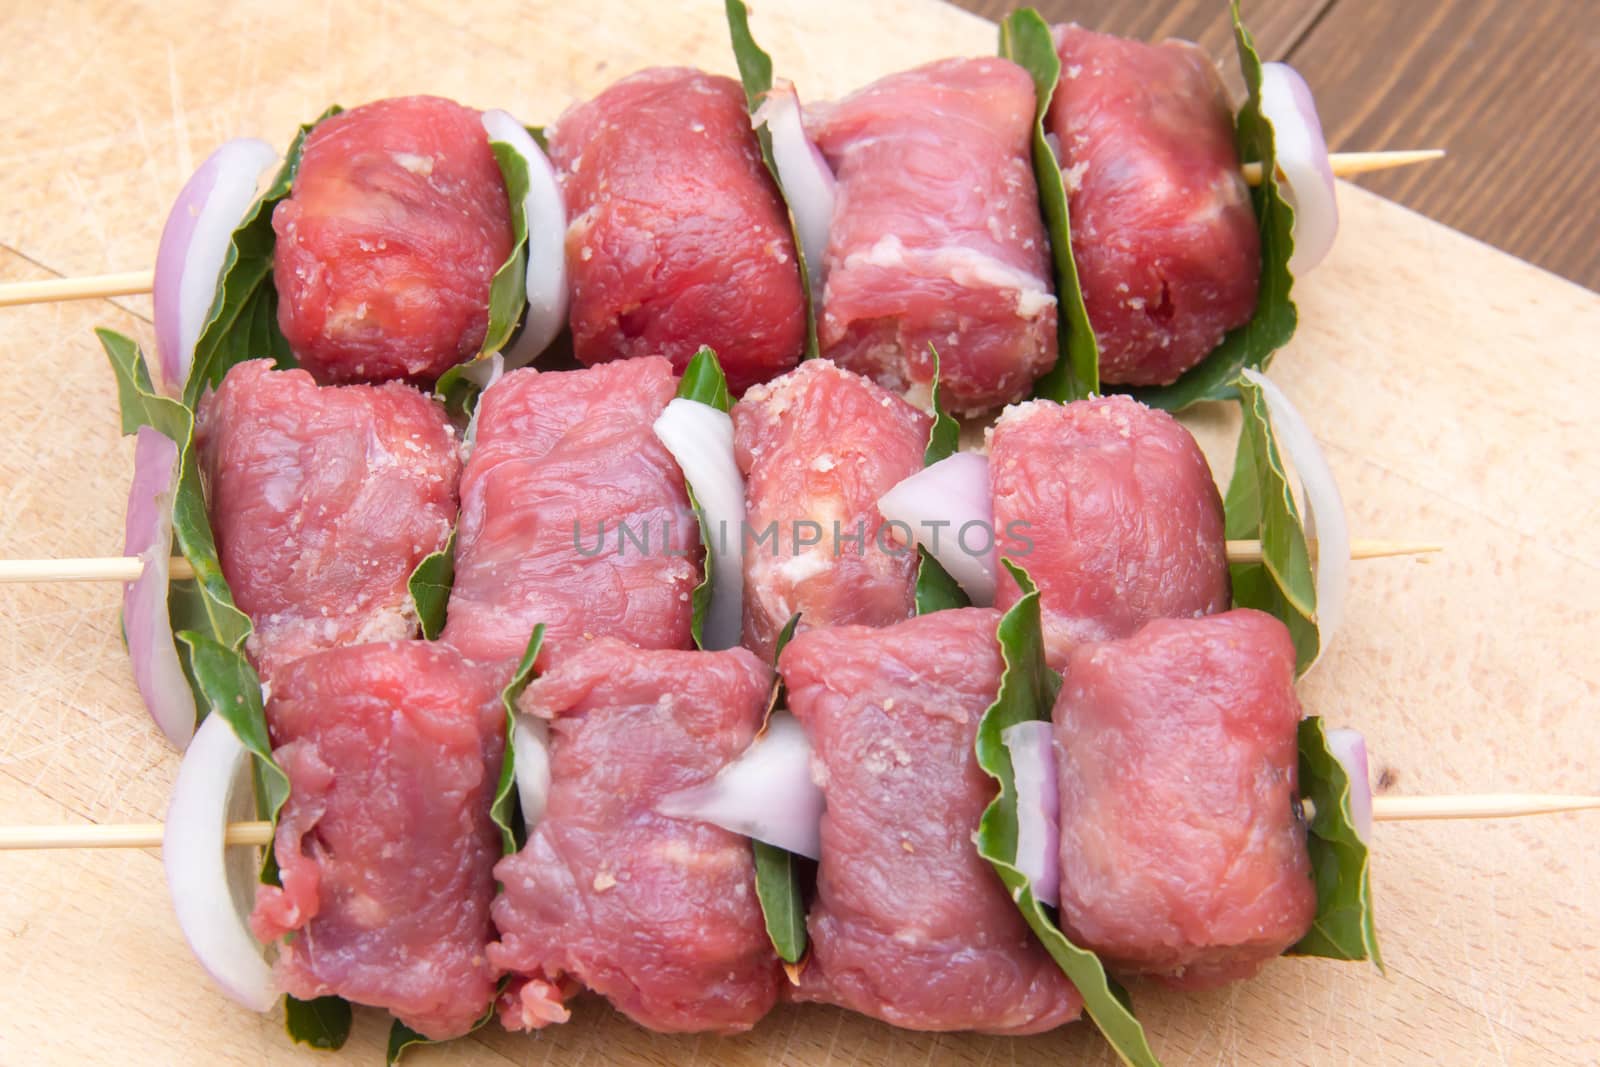 Skewers of meat on cutting board